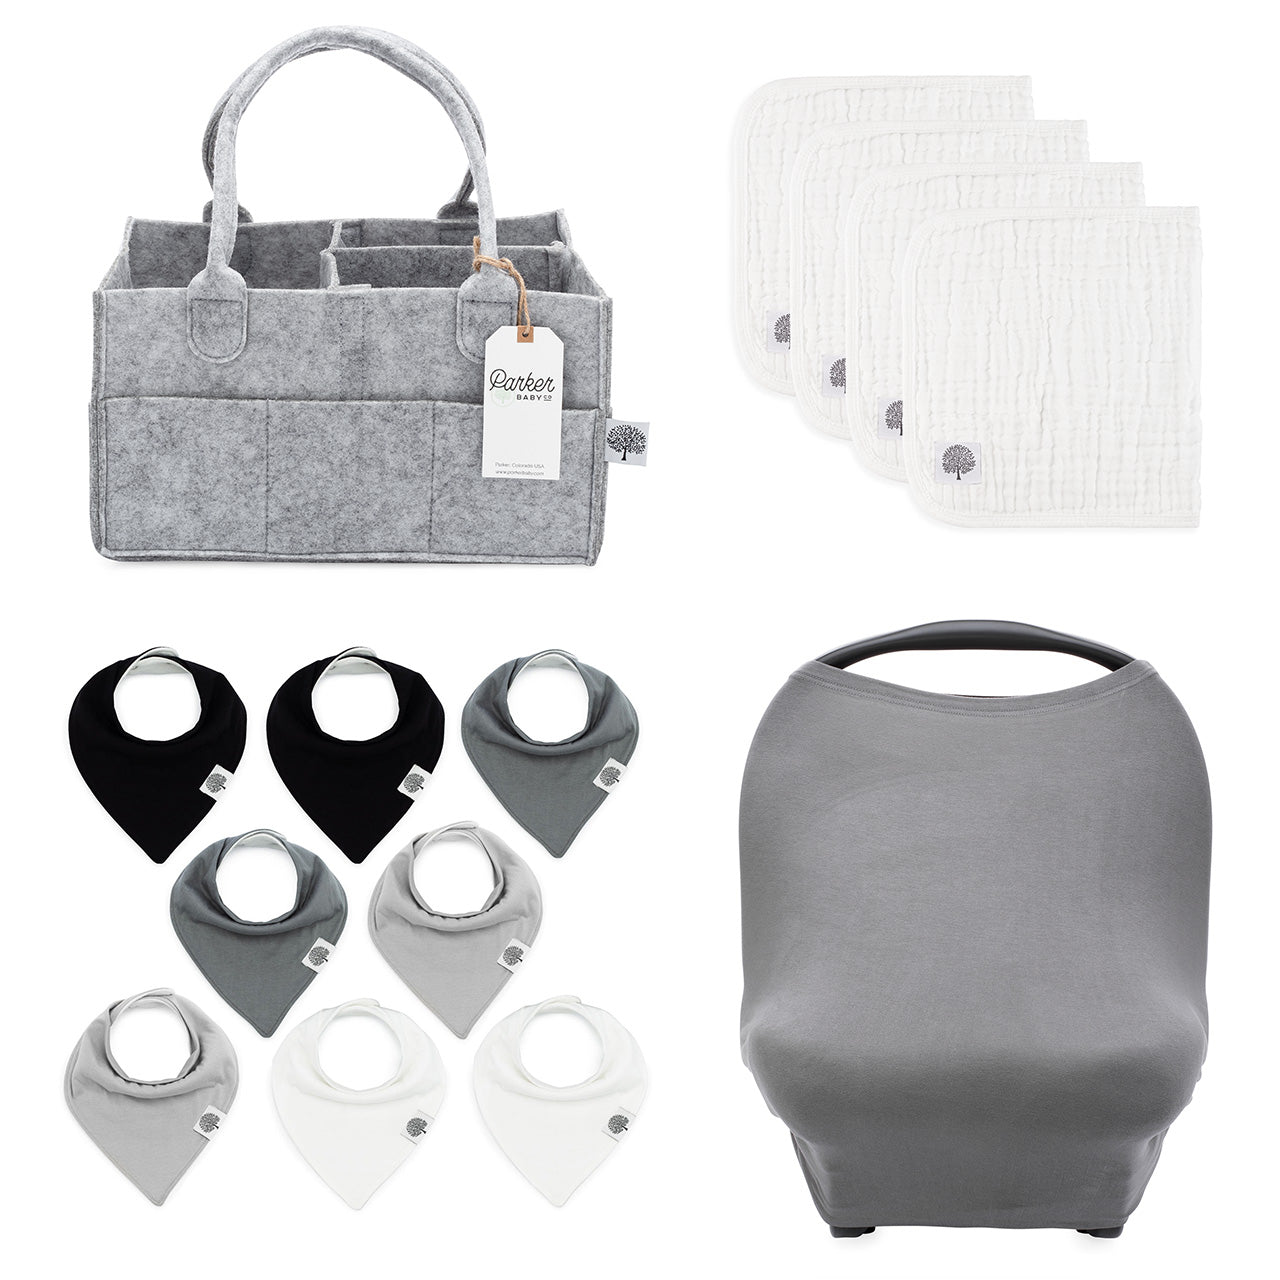 Basics gift set includes muslin cotton burp cloths, gray diapper caddy, gray car seat cover and set of 8 bandana bibs for baby